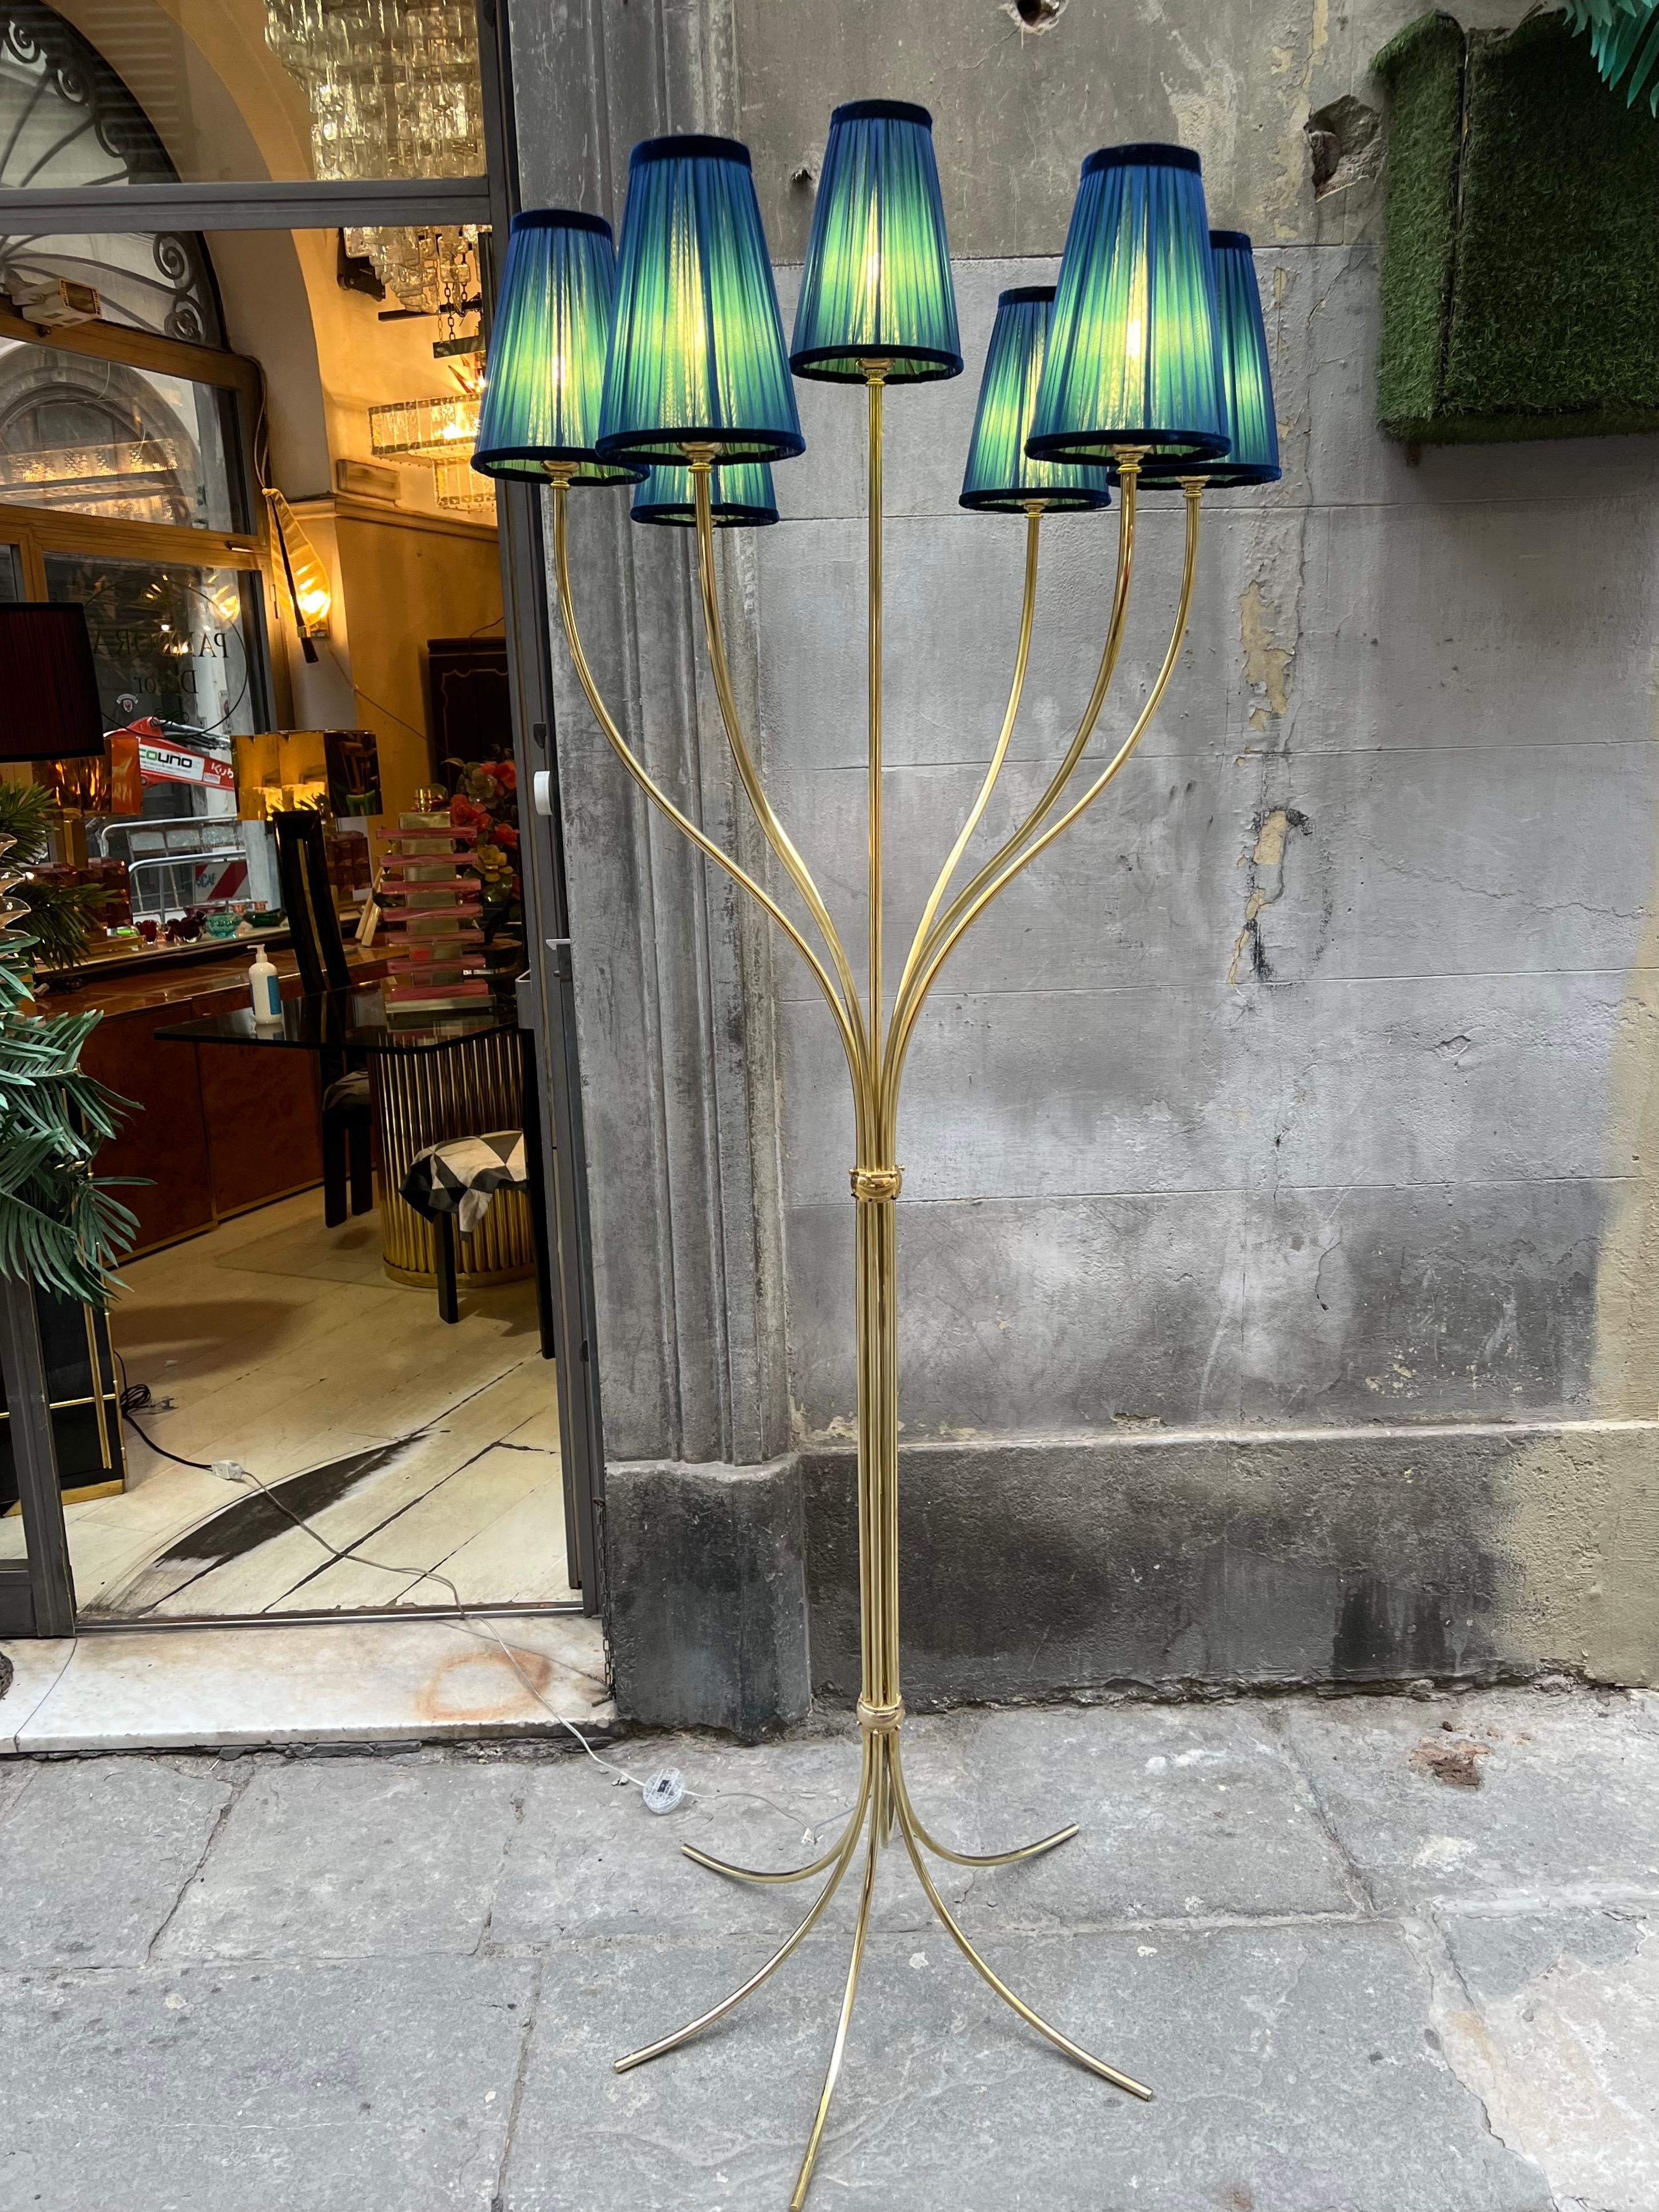 Vintage brass floor lamp with 7 brass arms each ends with its lampshade. Our Lampshades are handcrafted in double pleated silk chiffon, green inside and blue outside. When the light is on the colors mix creating an amazing effect.
The floor lamp has